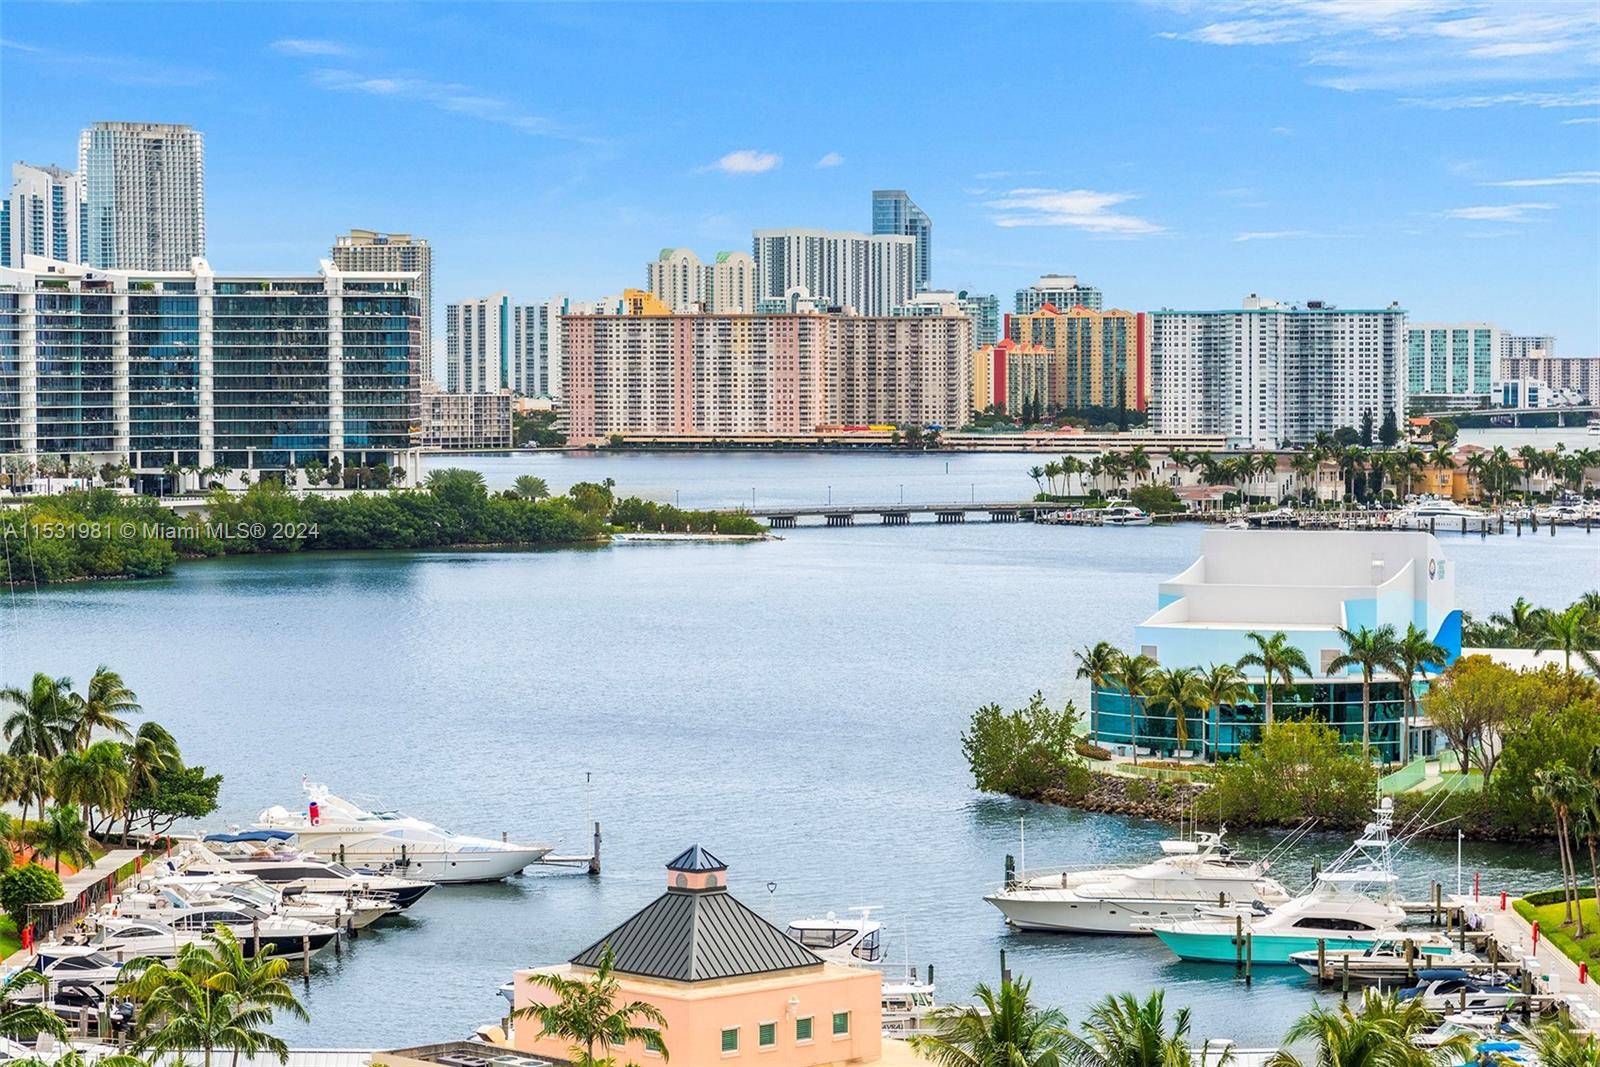 Experience stunning golf and water vistas from this remarkable corner apartment located in the vibrant heart of Aventura.